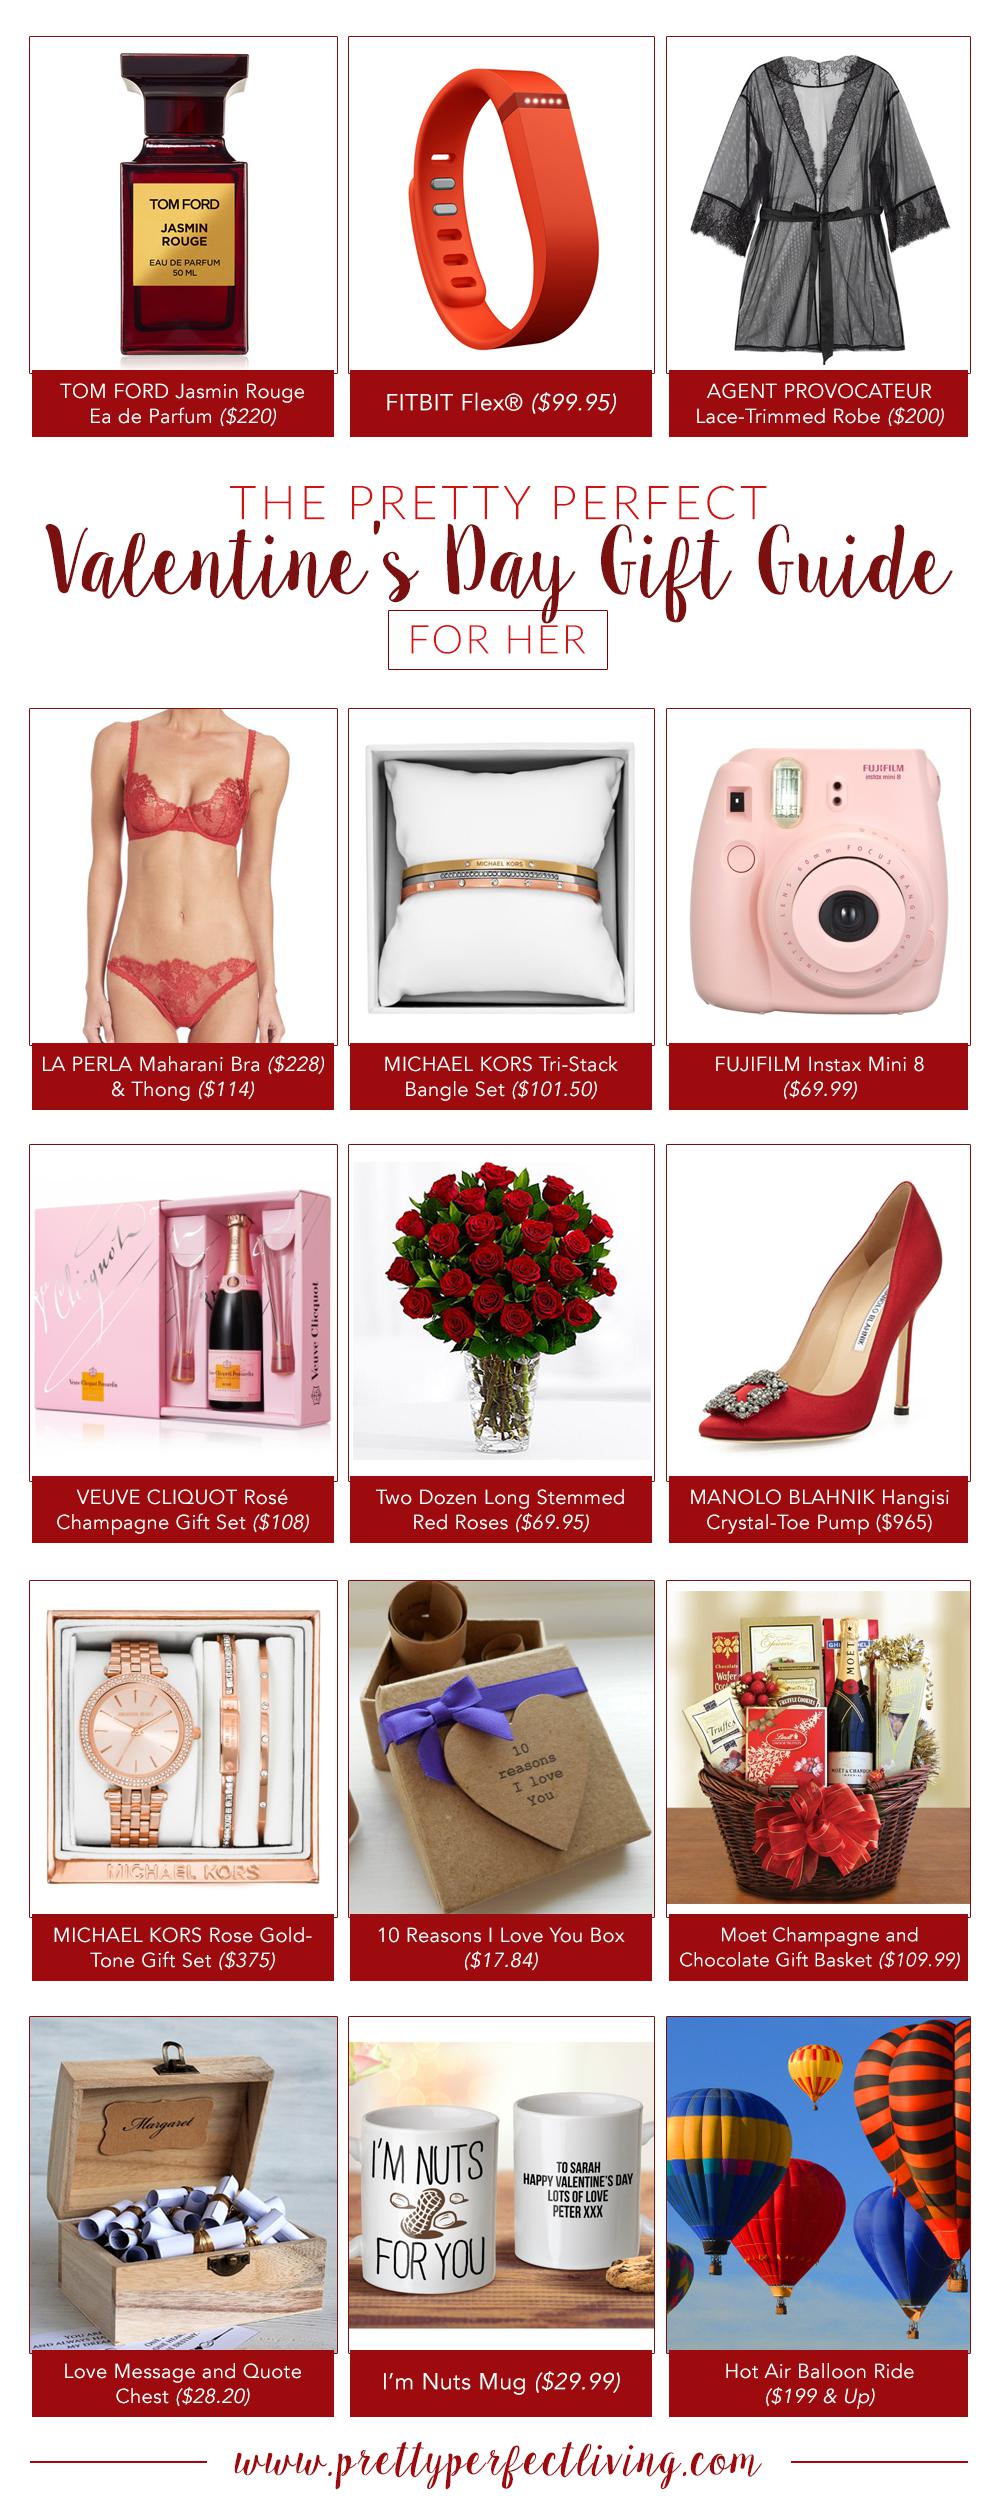 PPL-Valentines-Day-Gift-Guide-FOR-HER